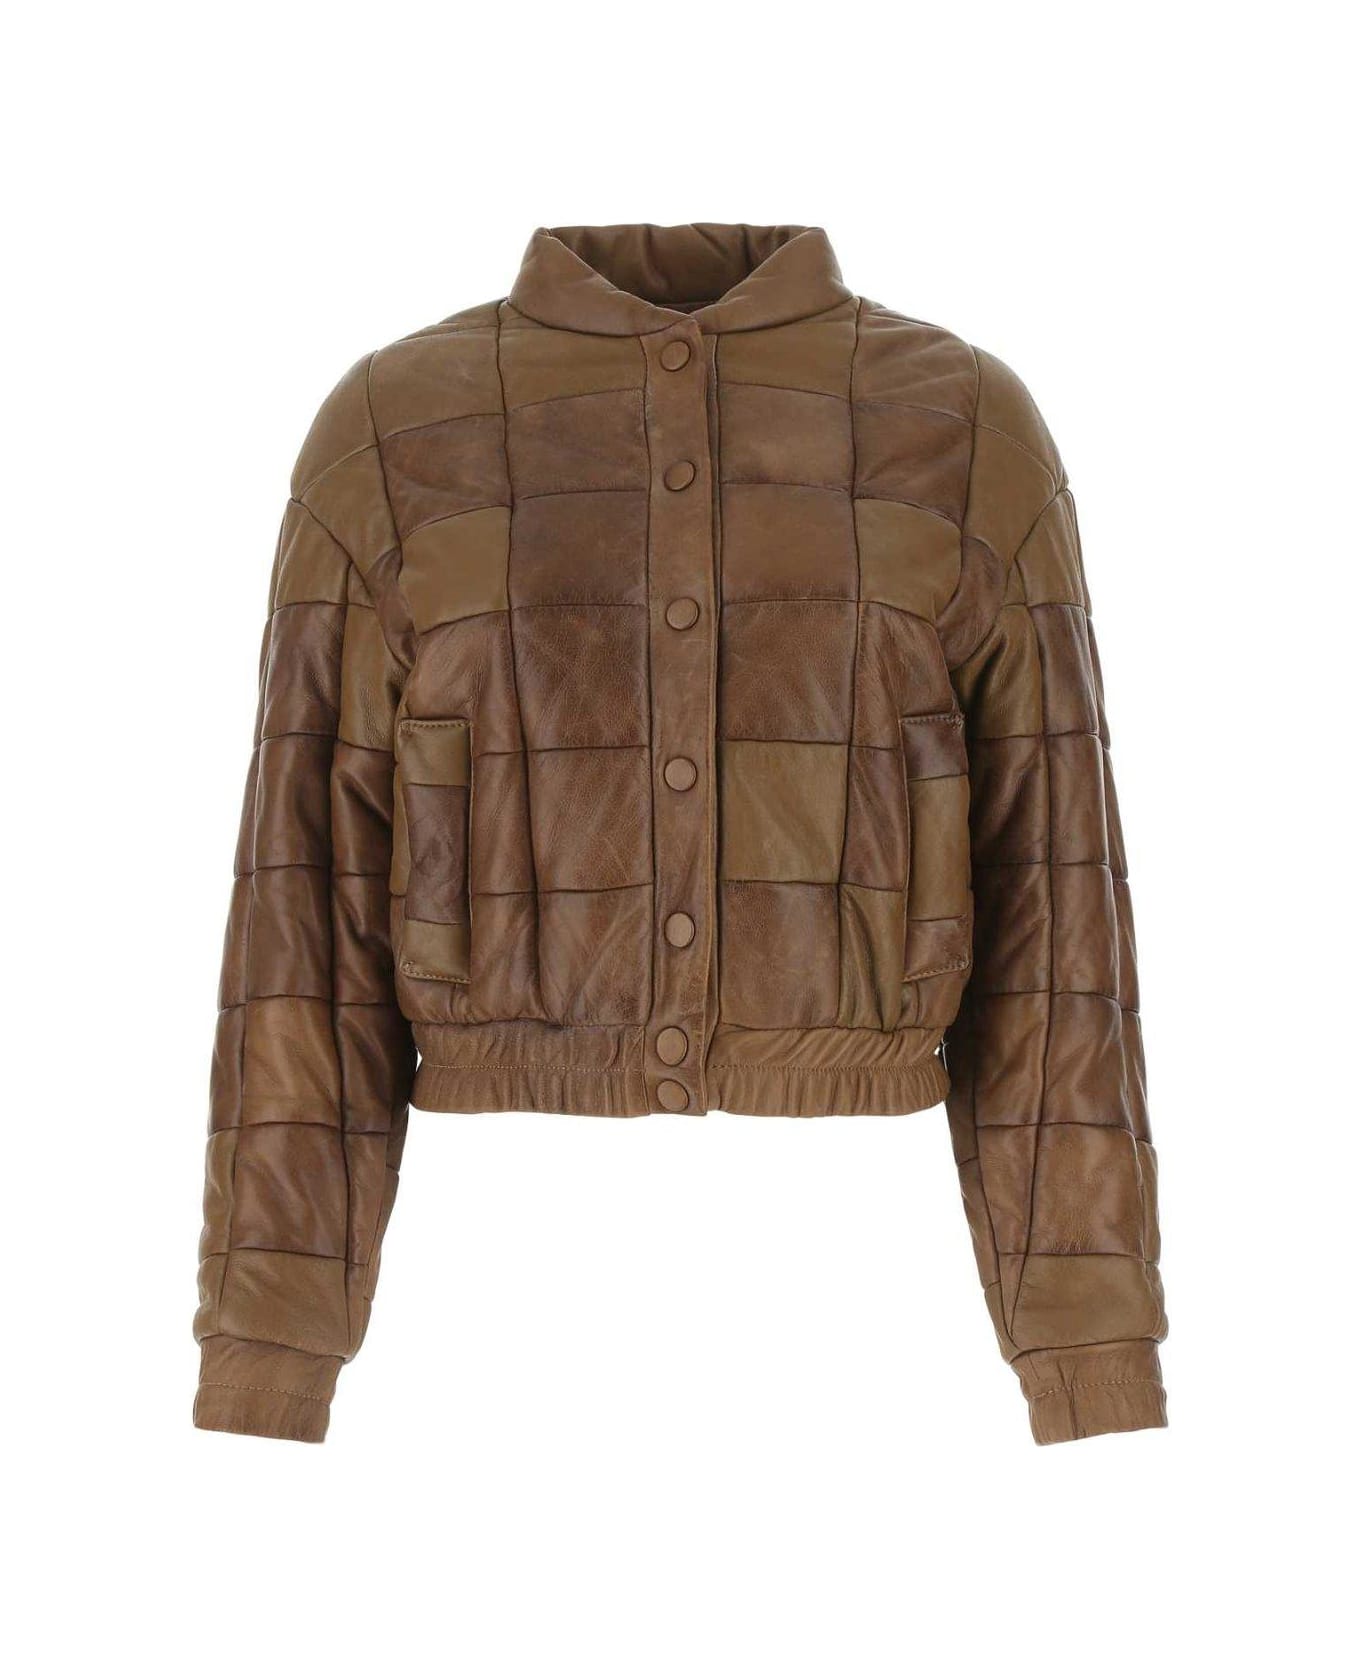 Golden Goose Buttoned Padded Jacket - Brown